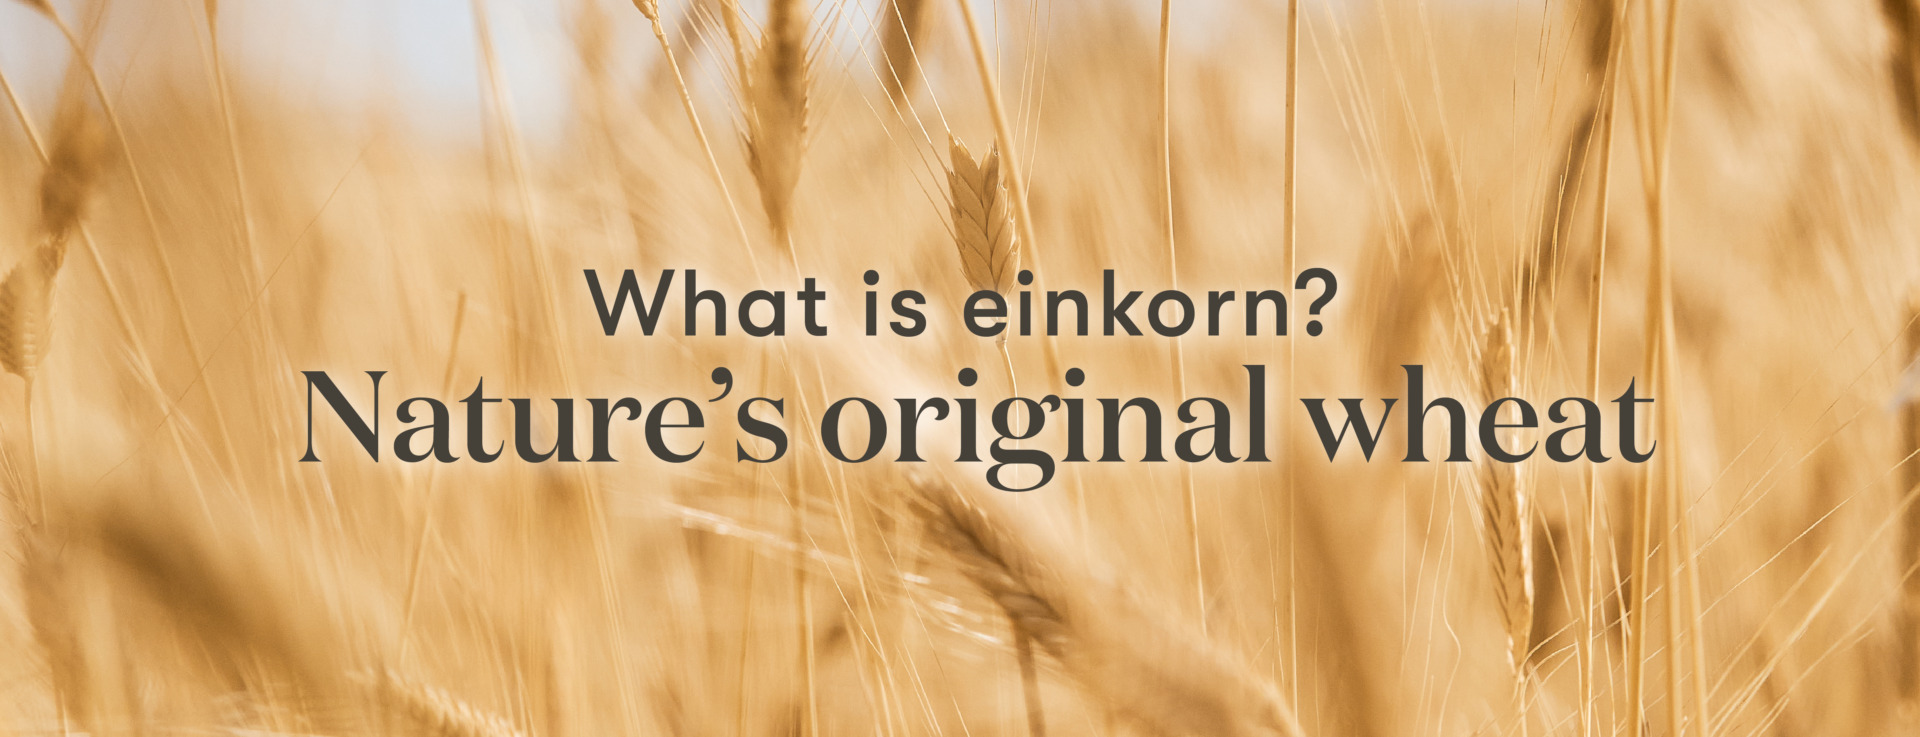 title image for what is einkorn